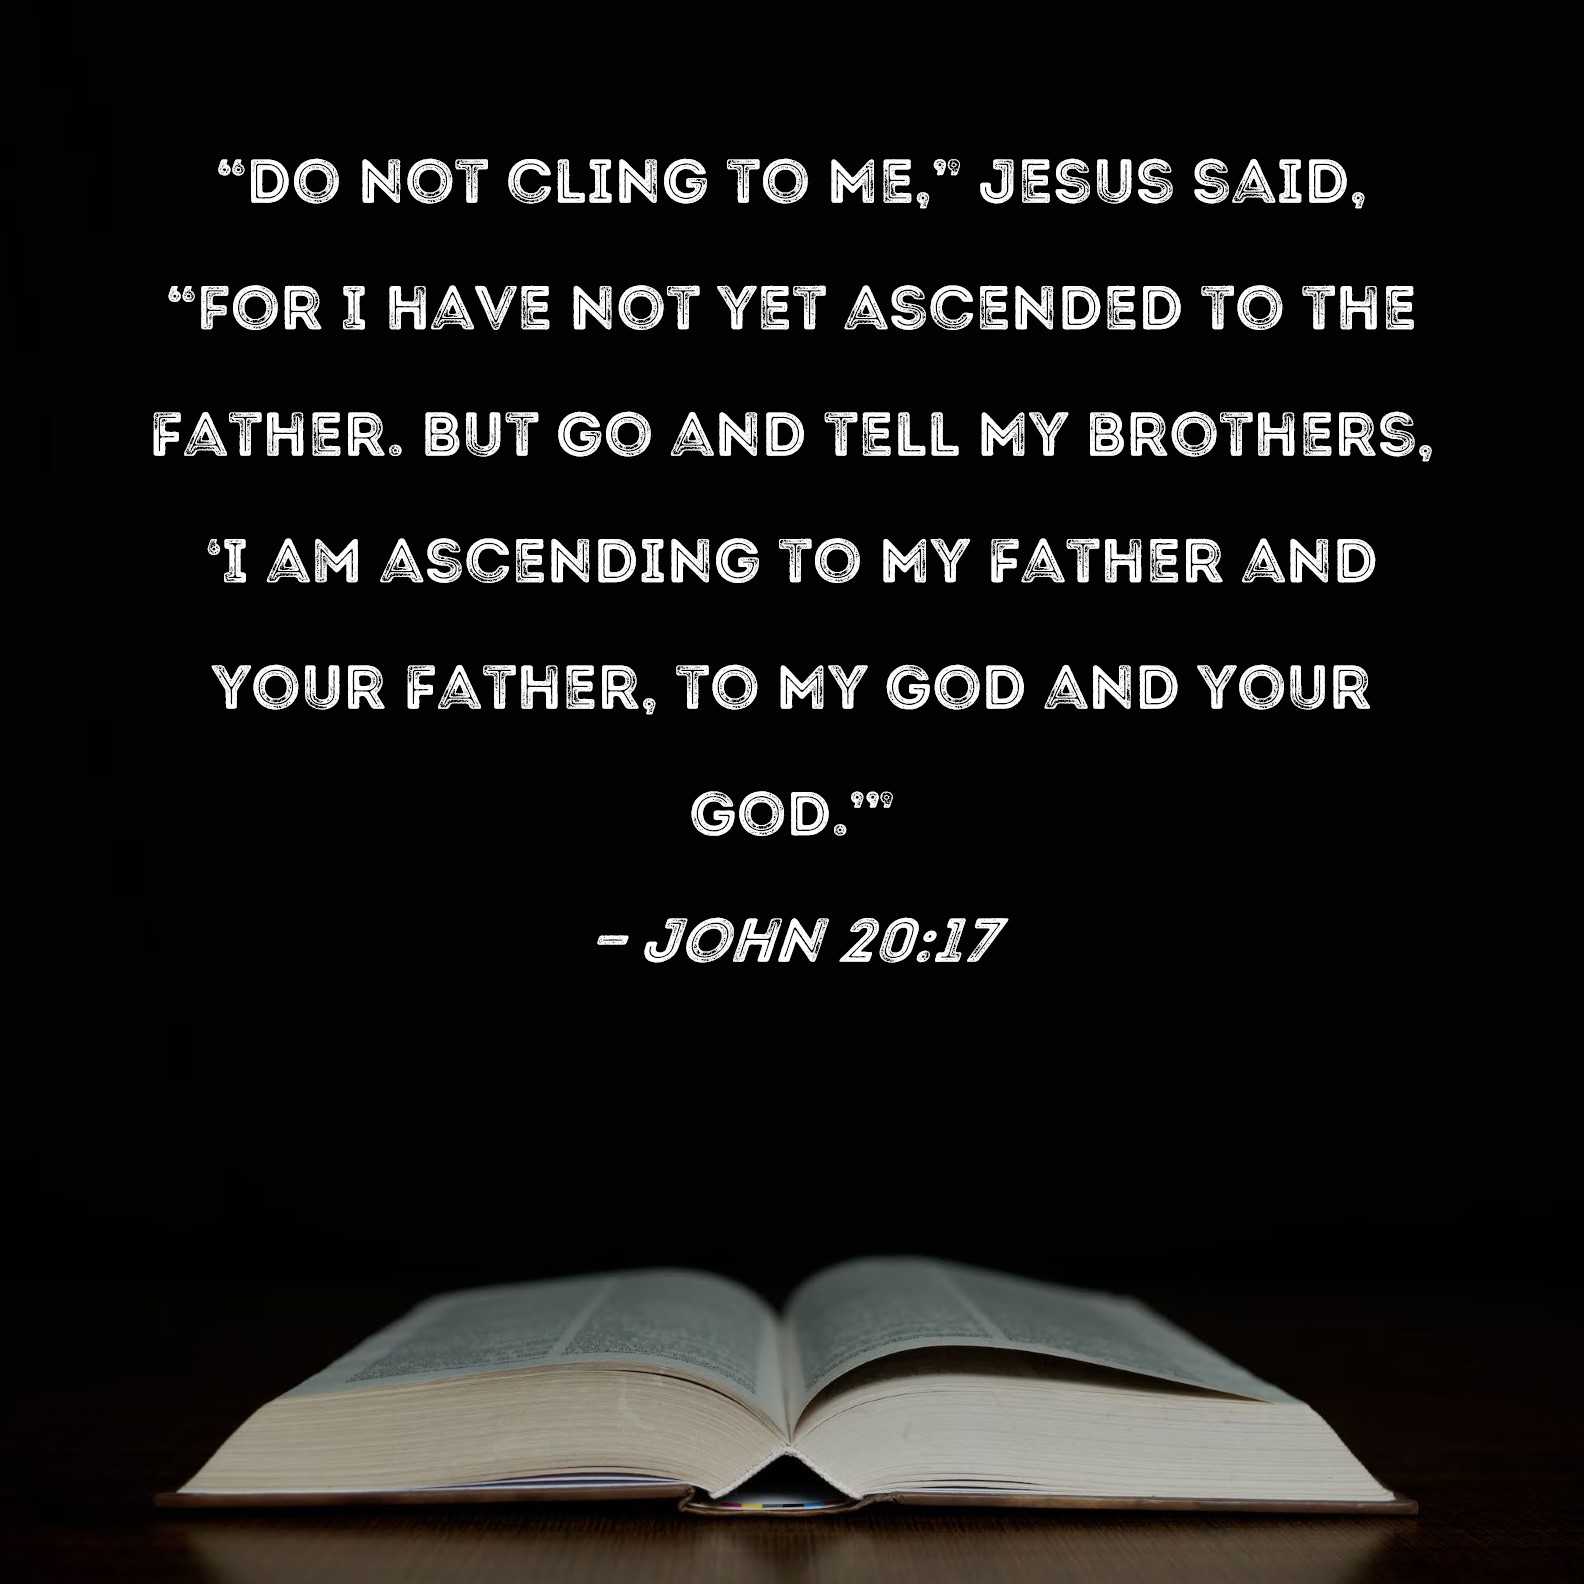 john-20-17-do-not-cling-to-me-jesus-said-for-i-have-not-yet